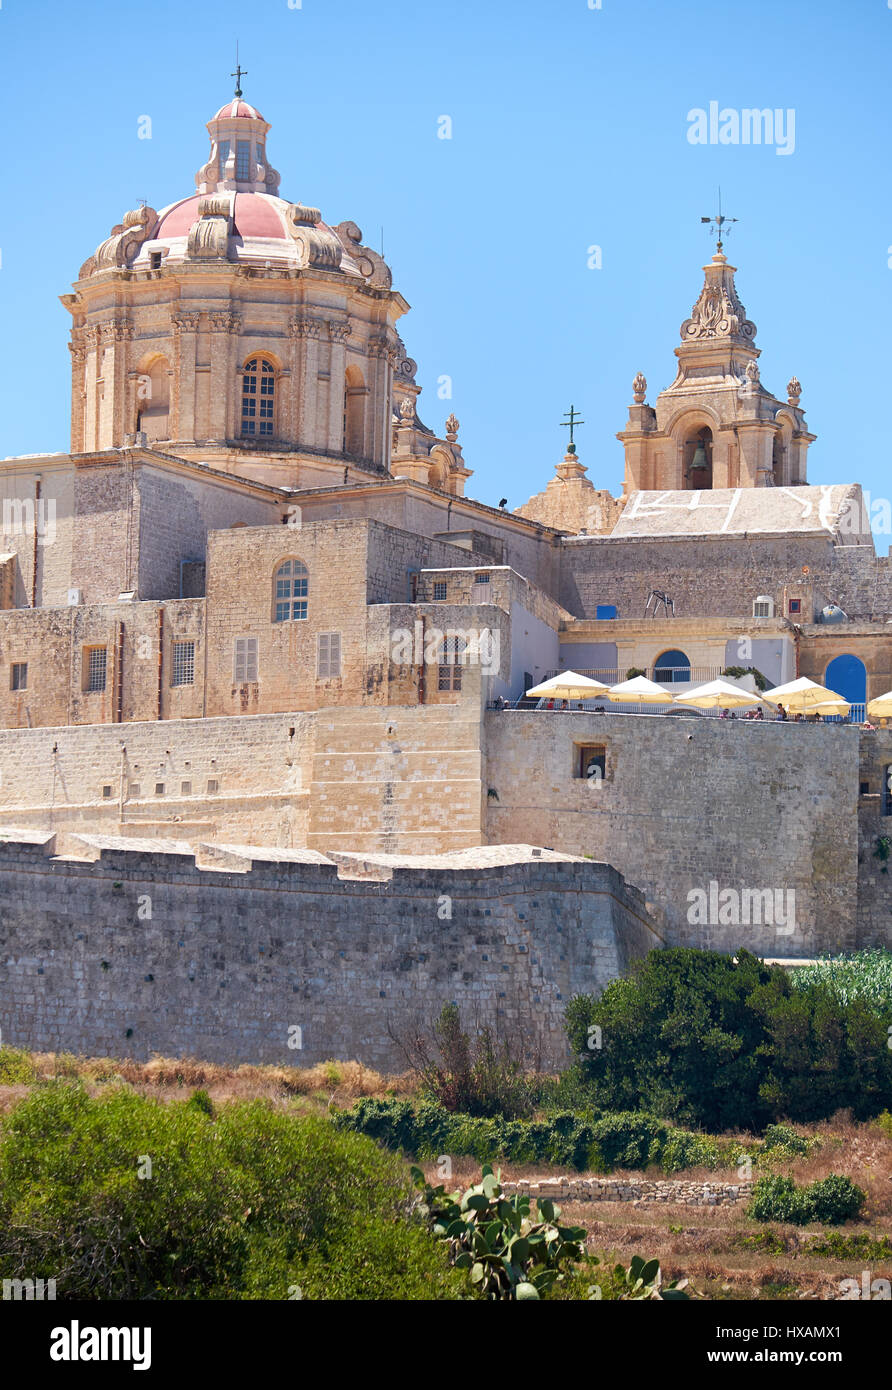 The view of the St. Paul's Cathedral in the old capital Mdina surrounding by the fortress wall from the countryside below. Malta Stock Photo